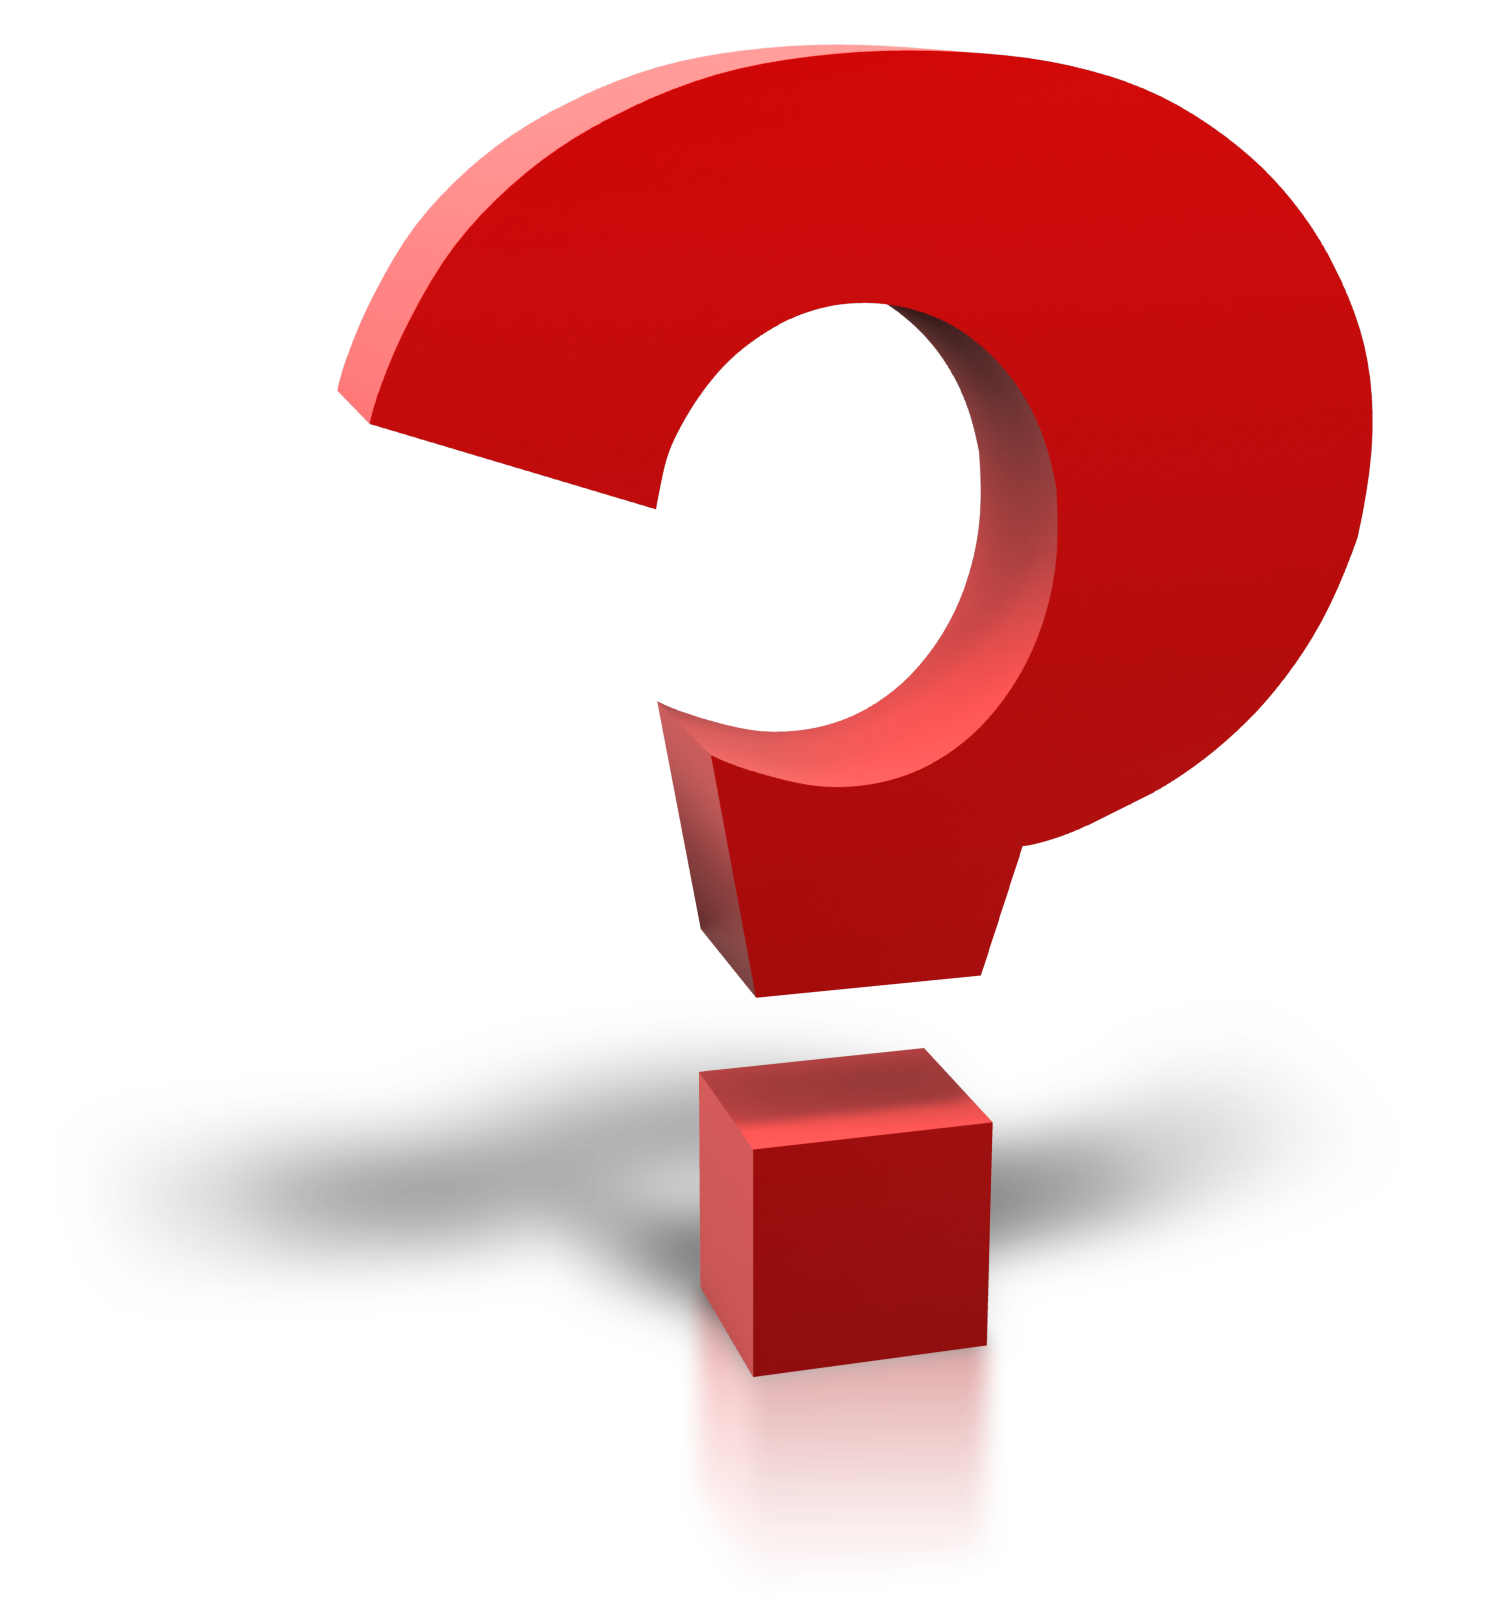 File:Question mark alternate.svg - Wikimedia Commons